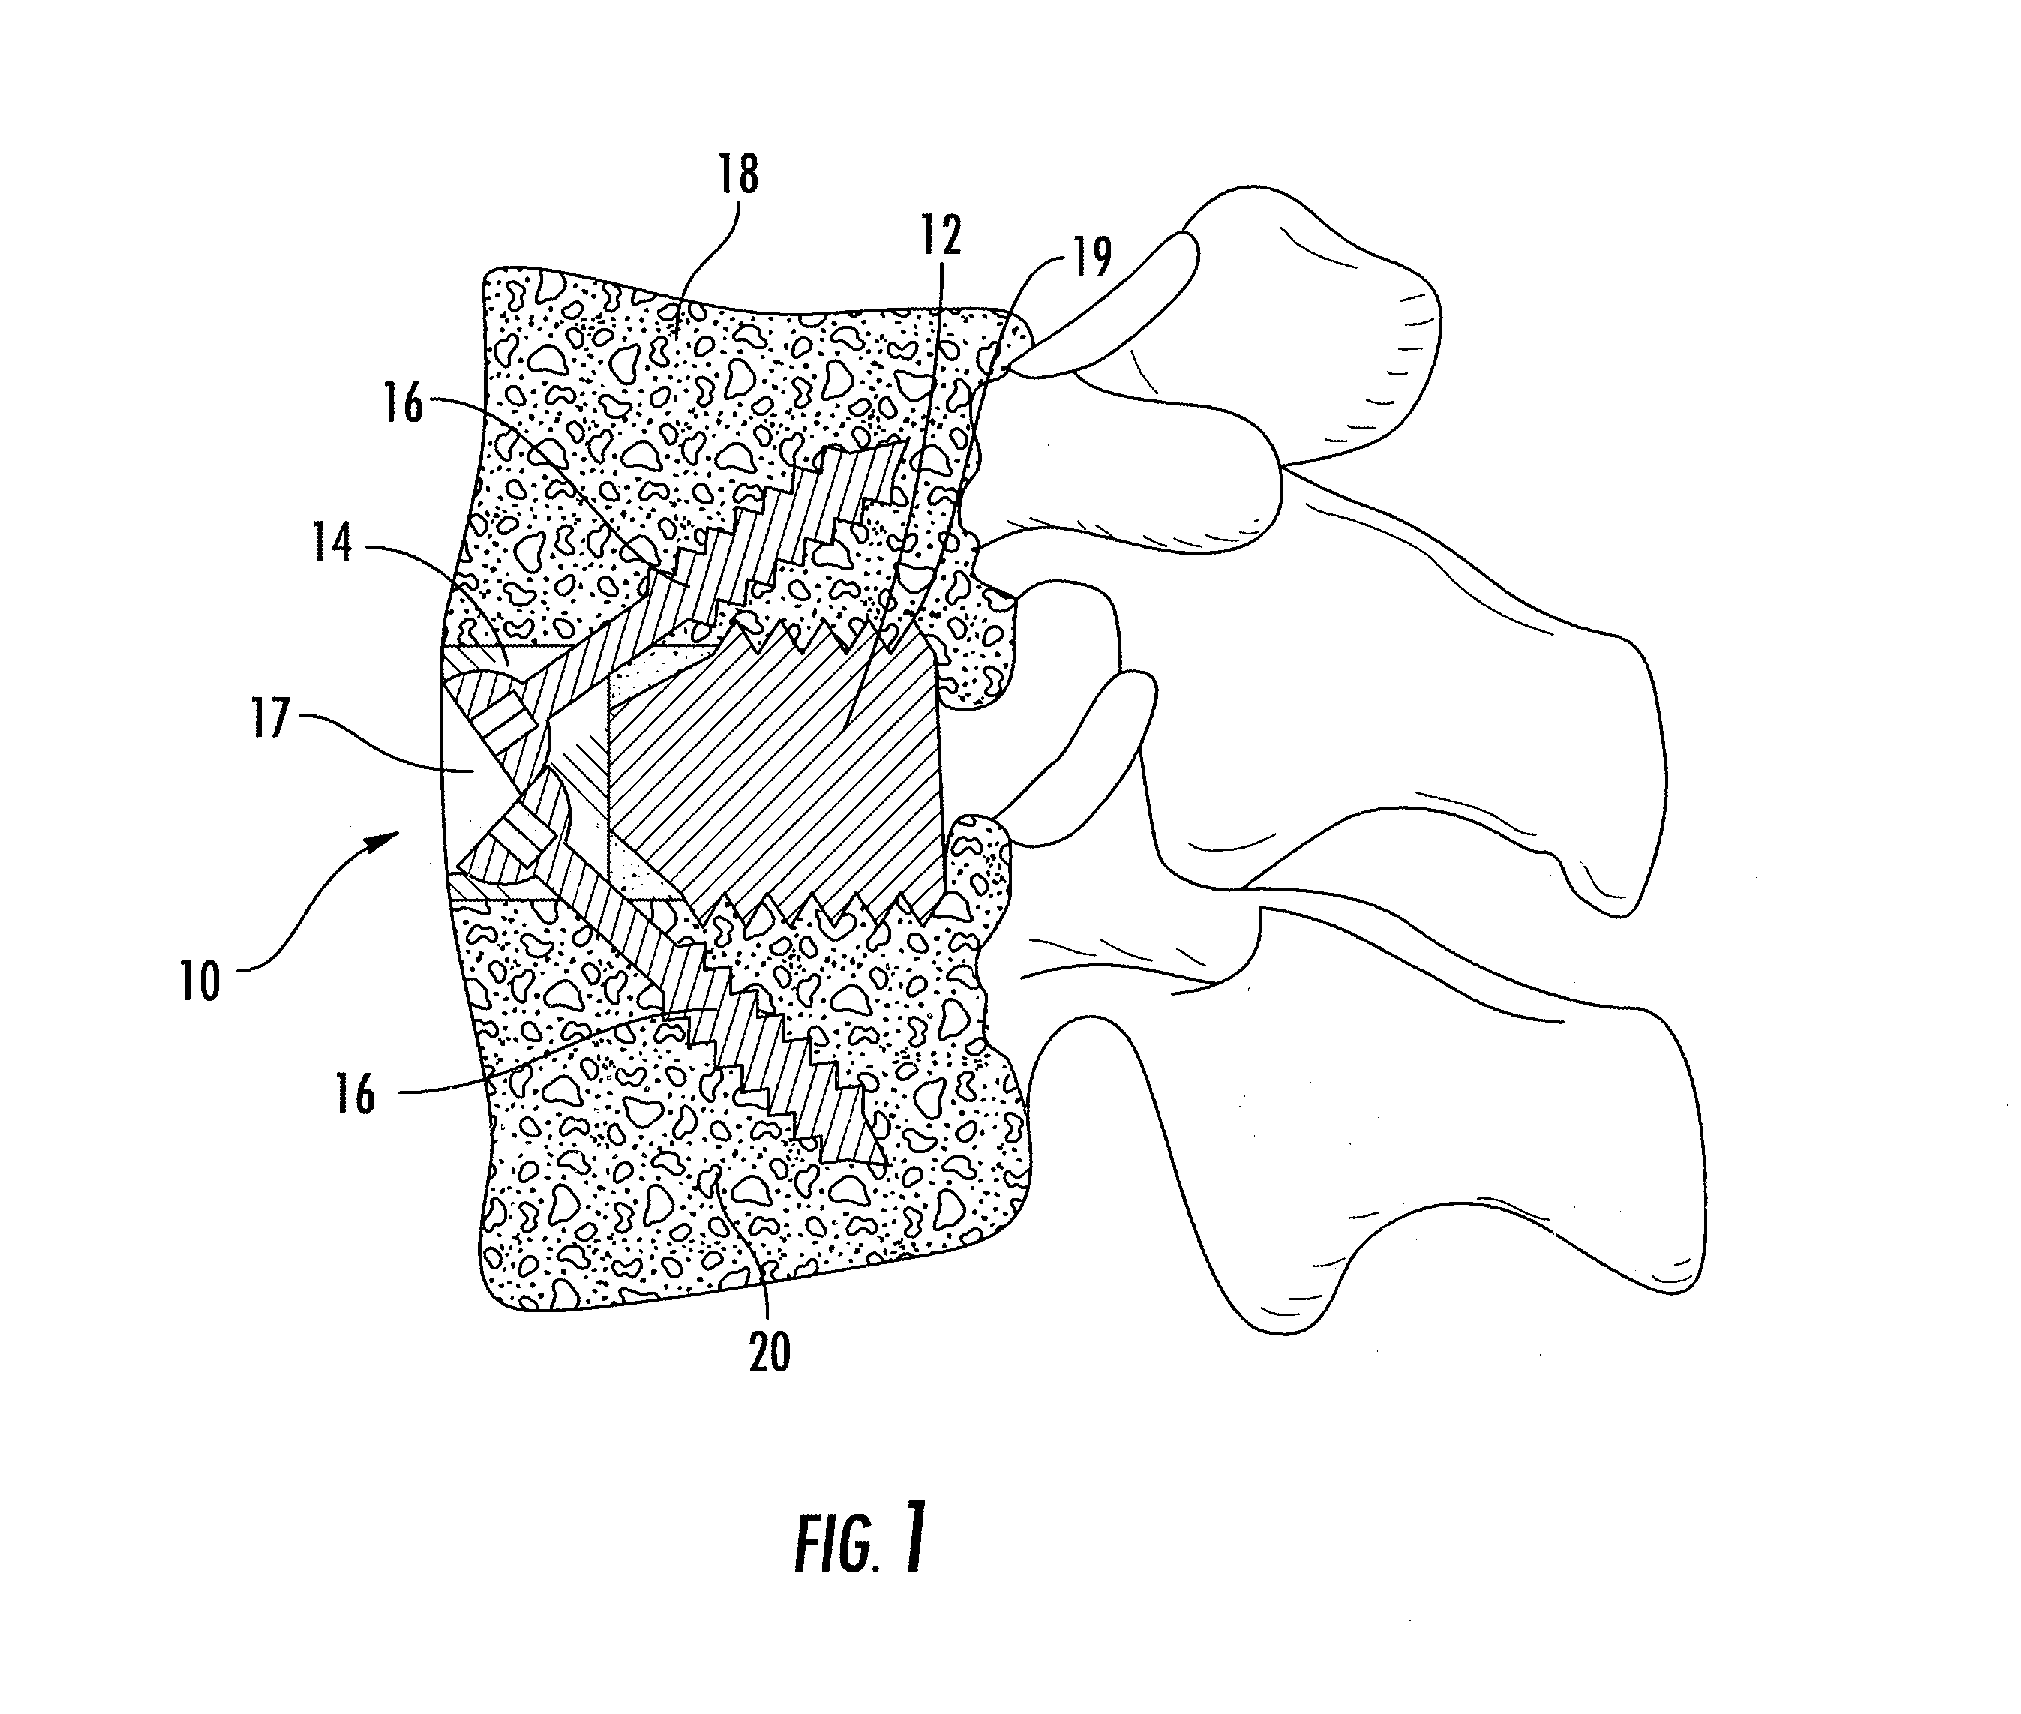 Interbody fusion system with intervertebral implant retention assembly